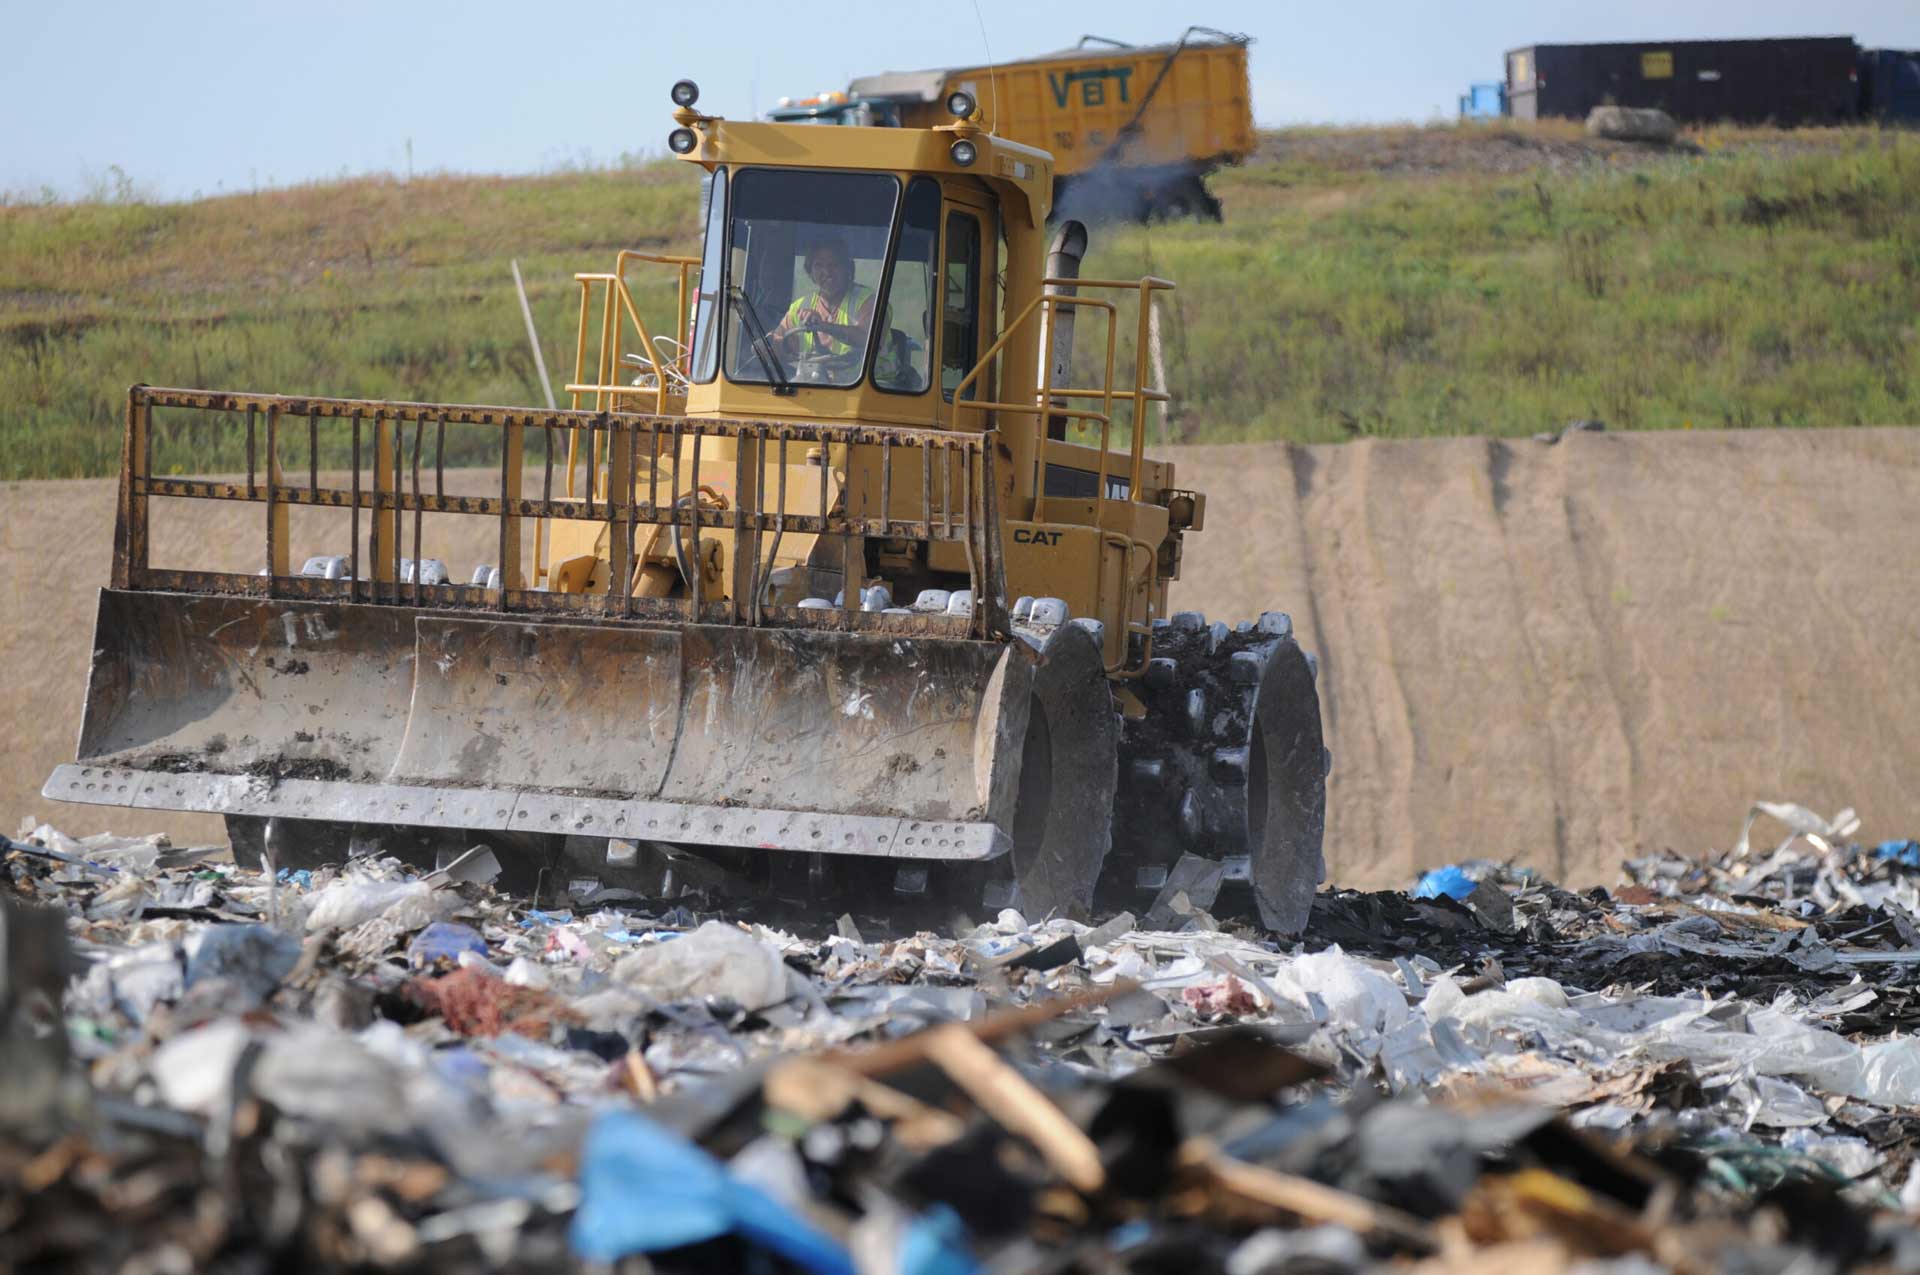 A Dem-Con employee in a bulldozer is managing landfill waste